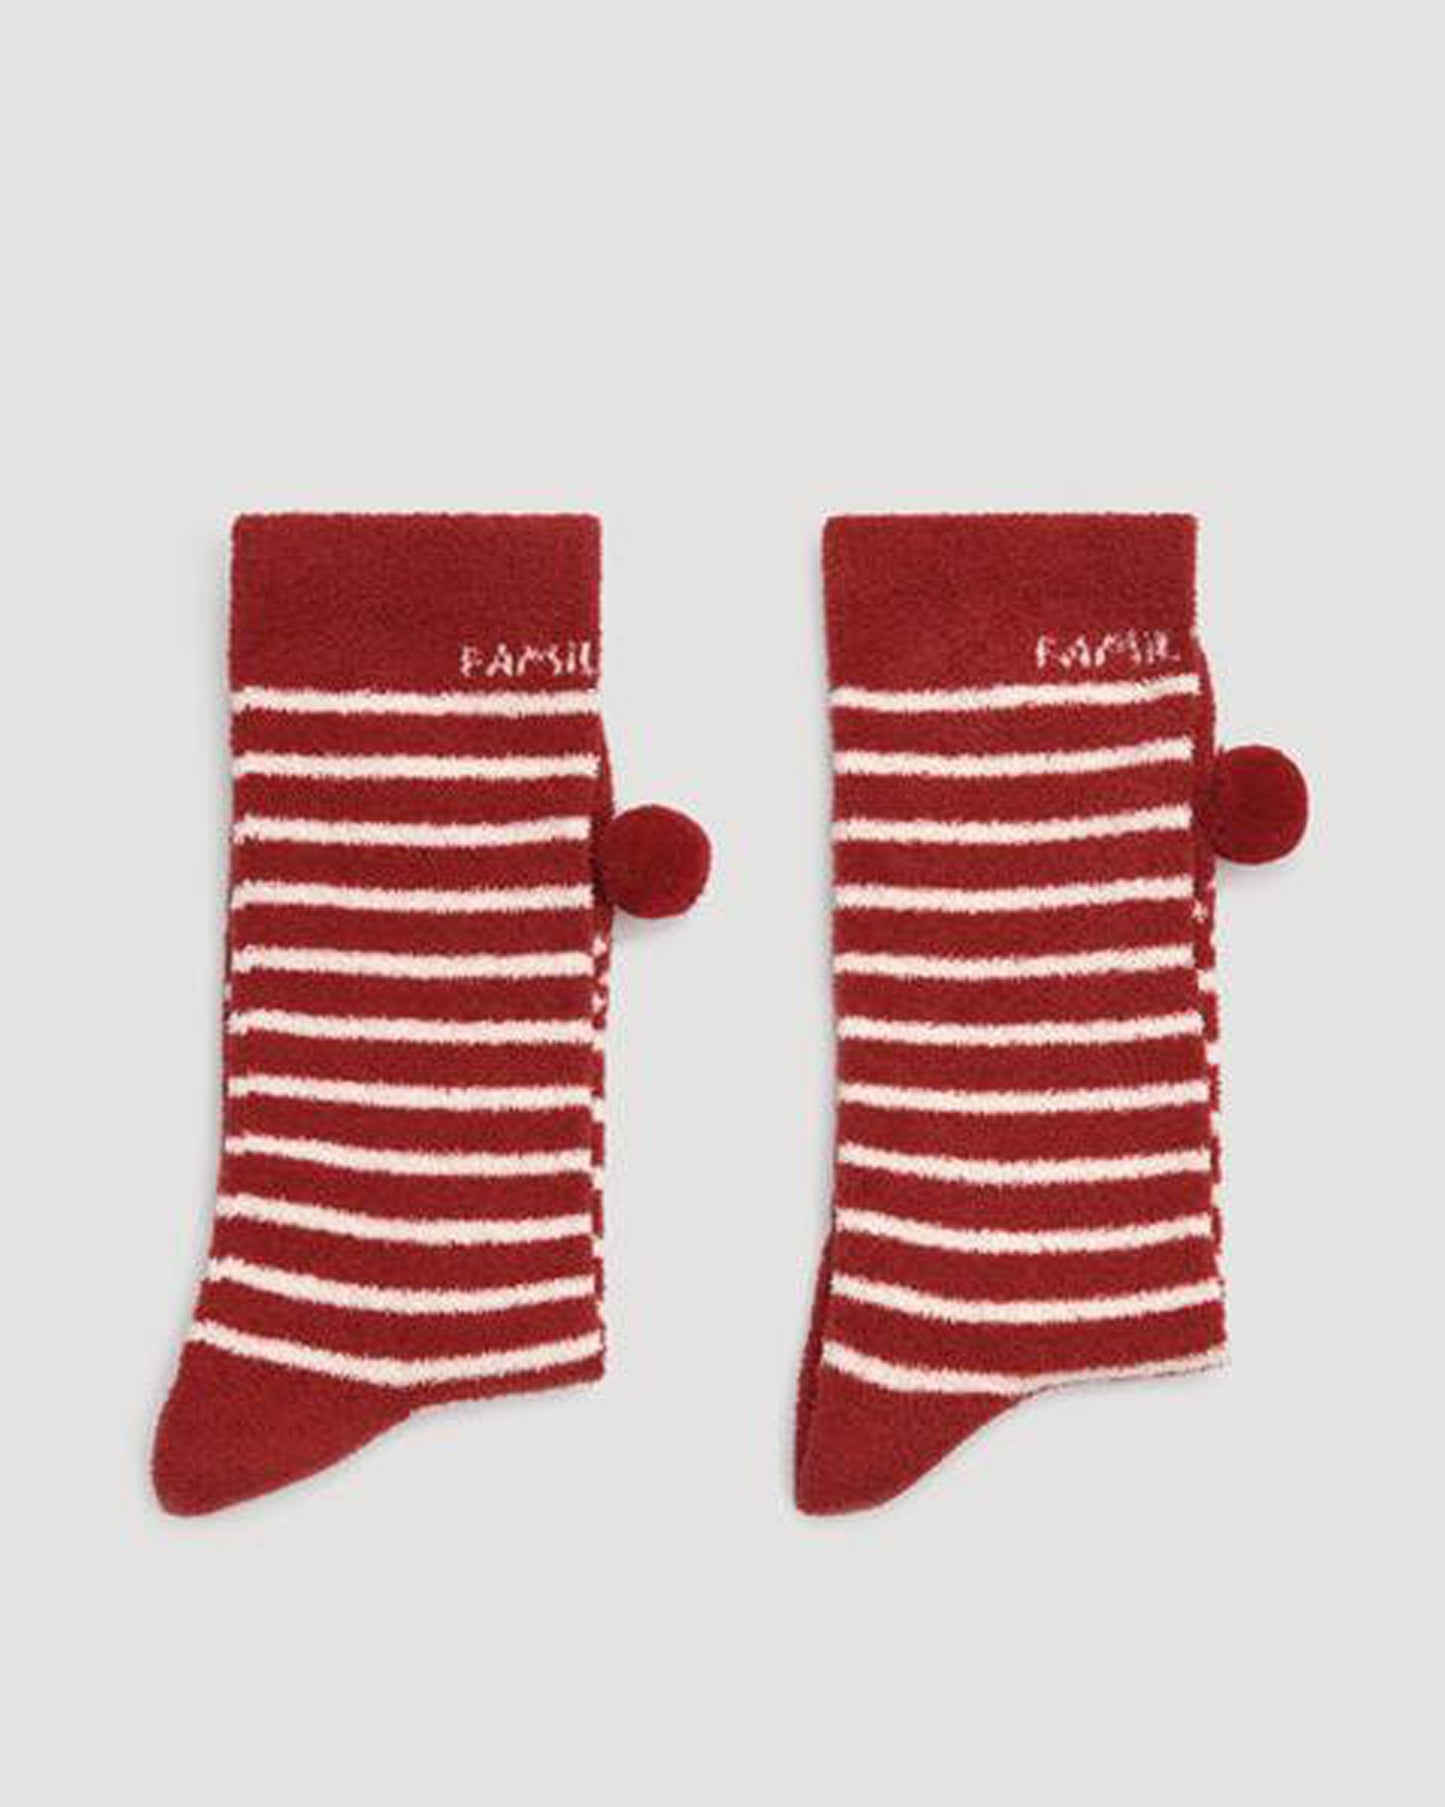 Ysabel Mora 12809 Rudolf Slipper Socks - Dark red fluffy flannel slipper socks gift box with a white stripe pattern, Rudolf at the toe with a red pom pom nose and the text 'Family Time' on the cuff. 